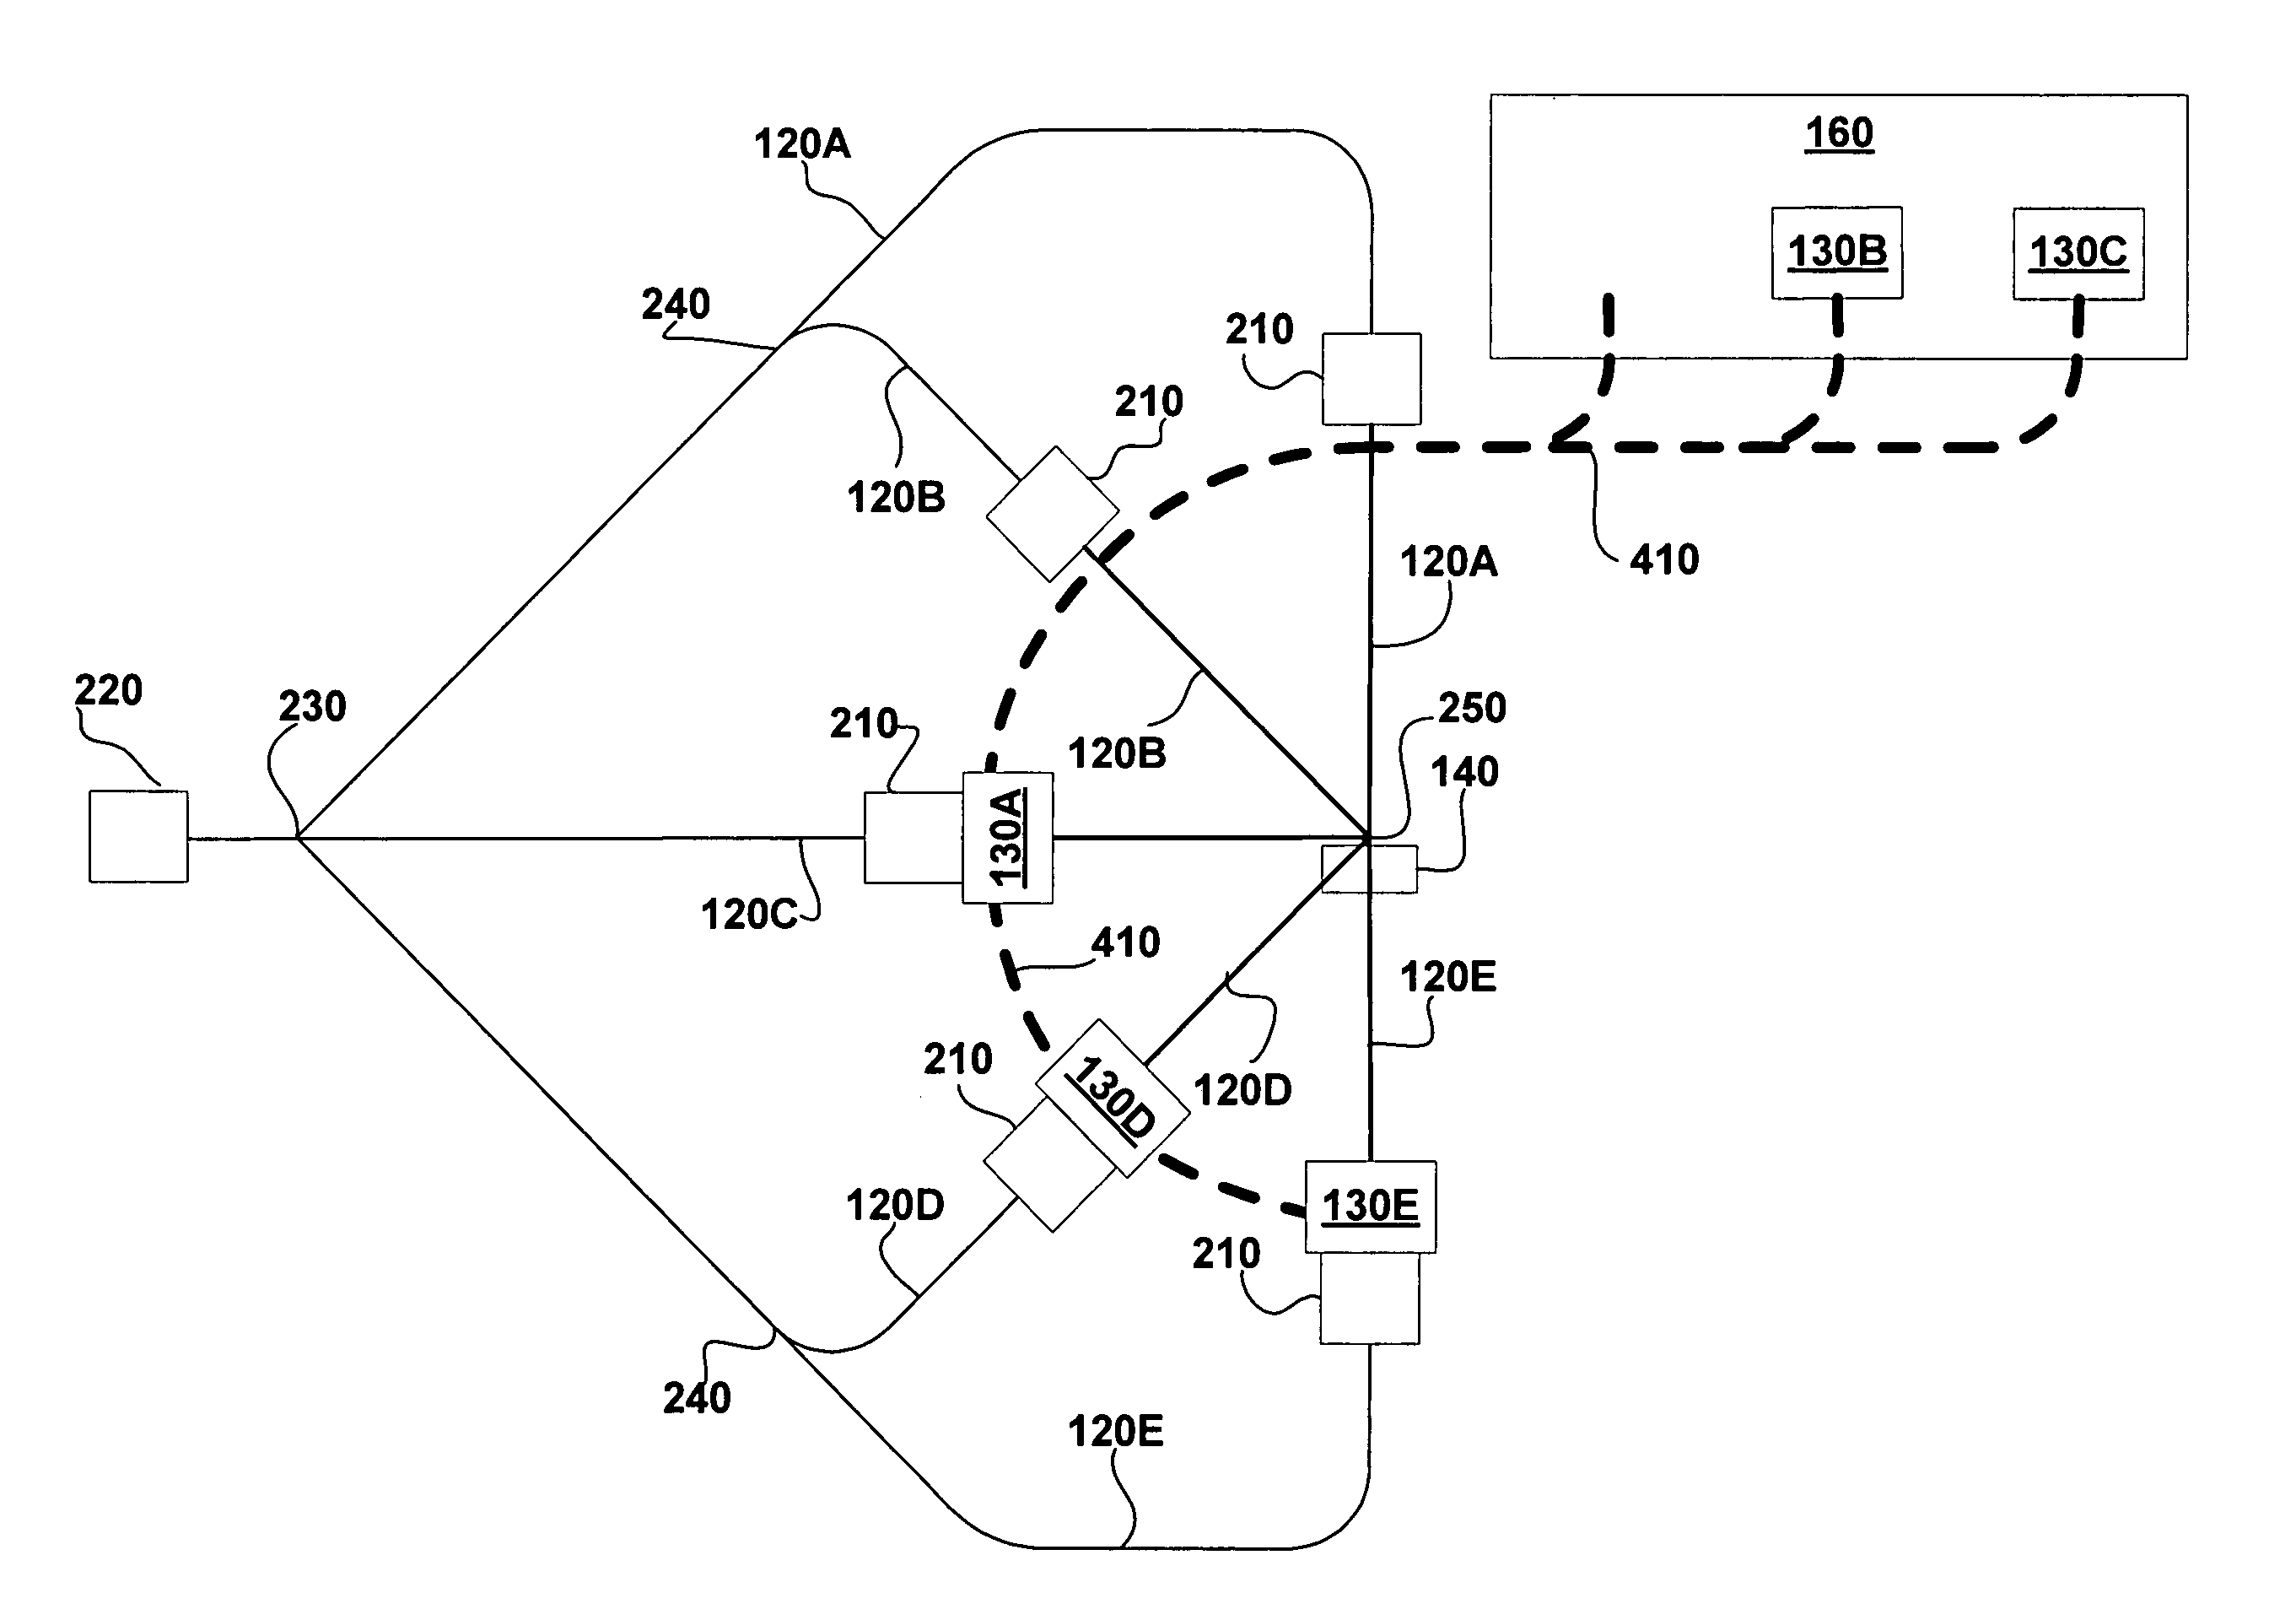 Particle beam nozzle transport system